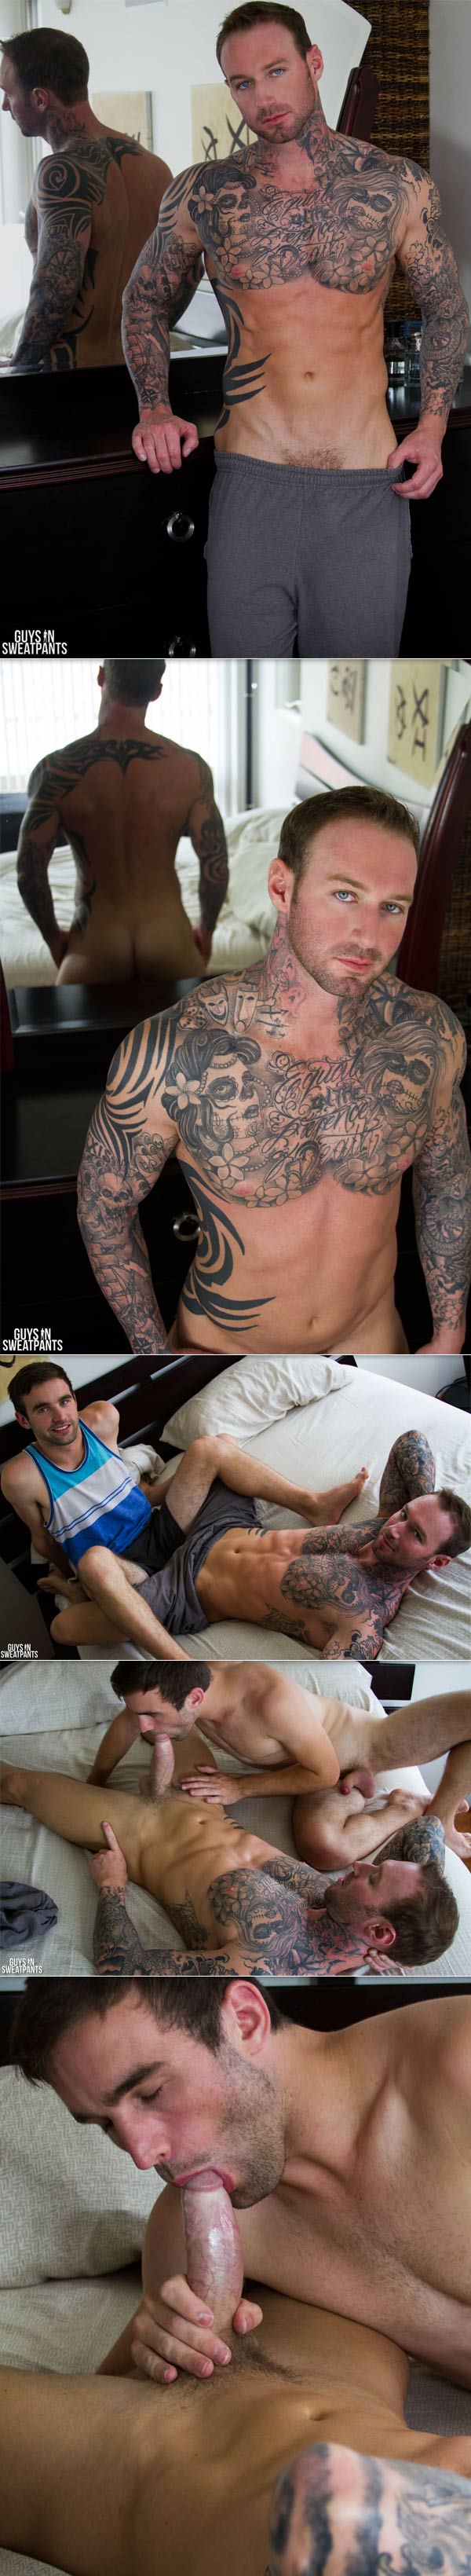 Dylan James' First Video (Andrew Collins & Dylan James) (Bareback) at Guys In Sweatpants